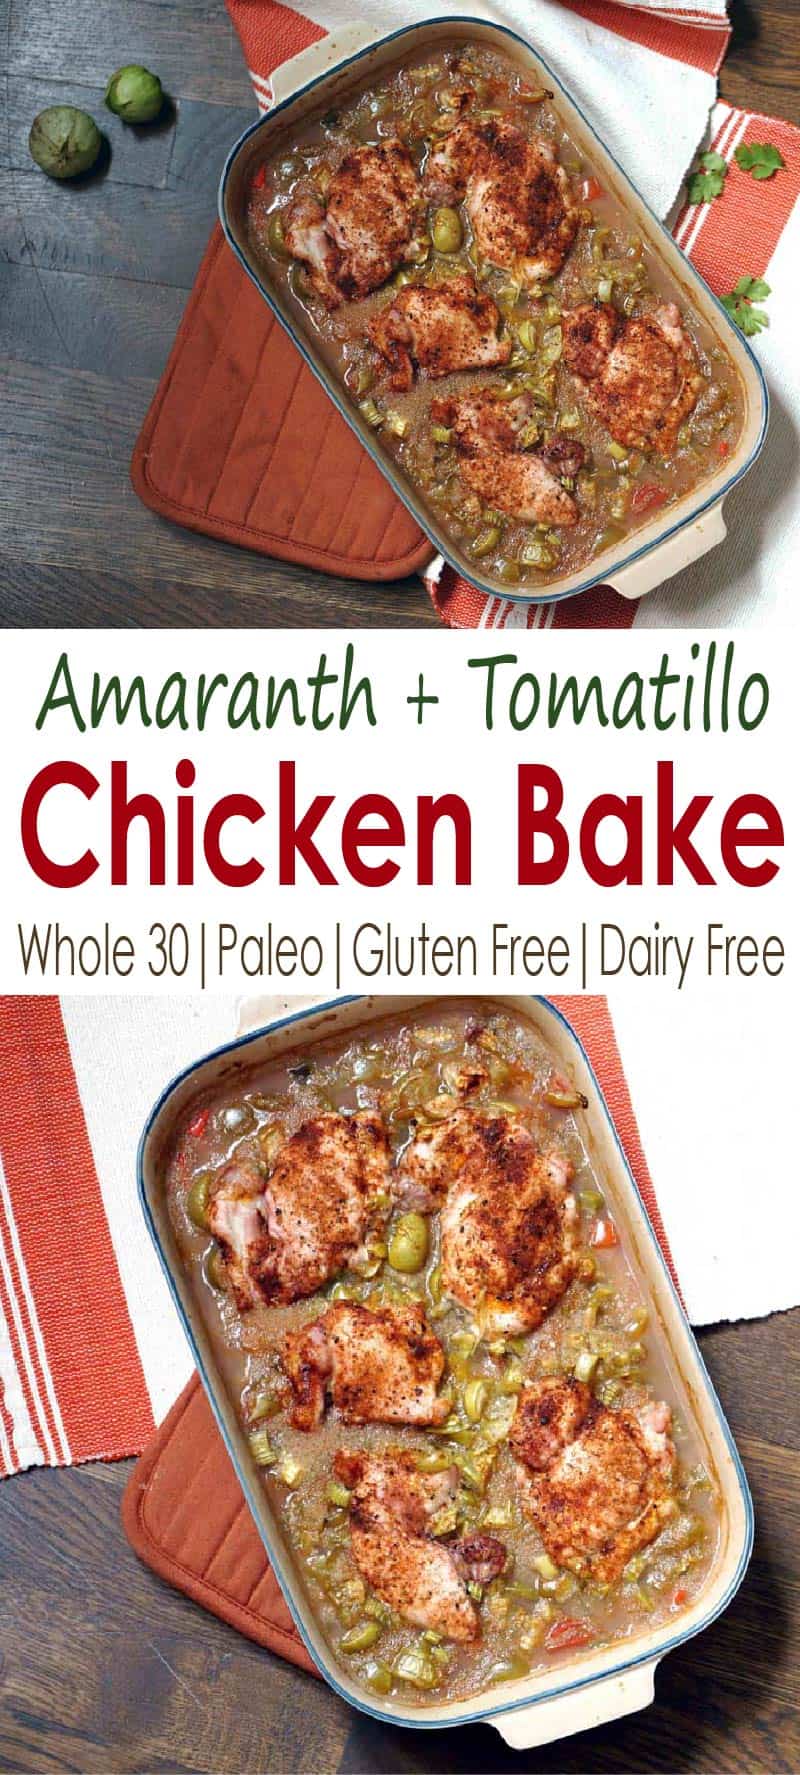 A foolproof recipe for weeknight dinners or to bring for a meal train, this amaranth and tomatillo chicken bake is loaded with protein, vitamins, and flavor. #whole30 #paleo #glutenfree #dairyfree #casserole